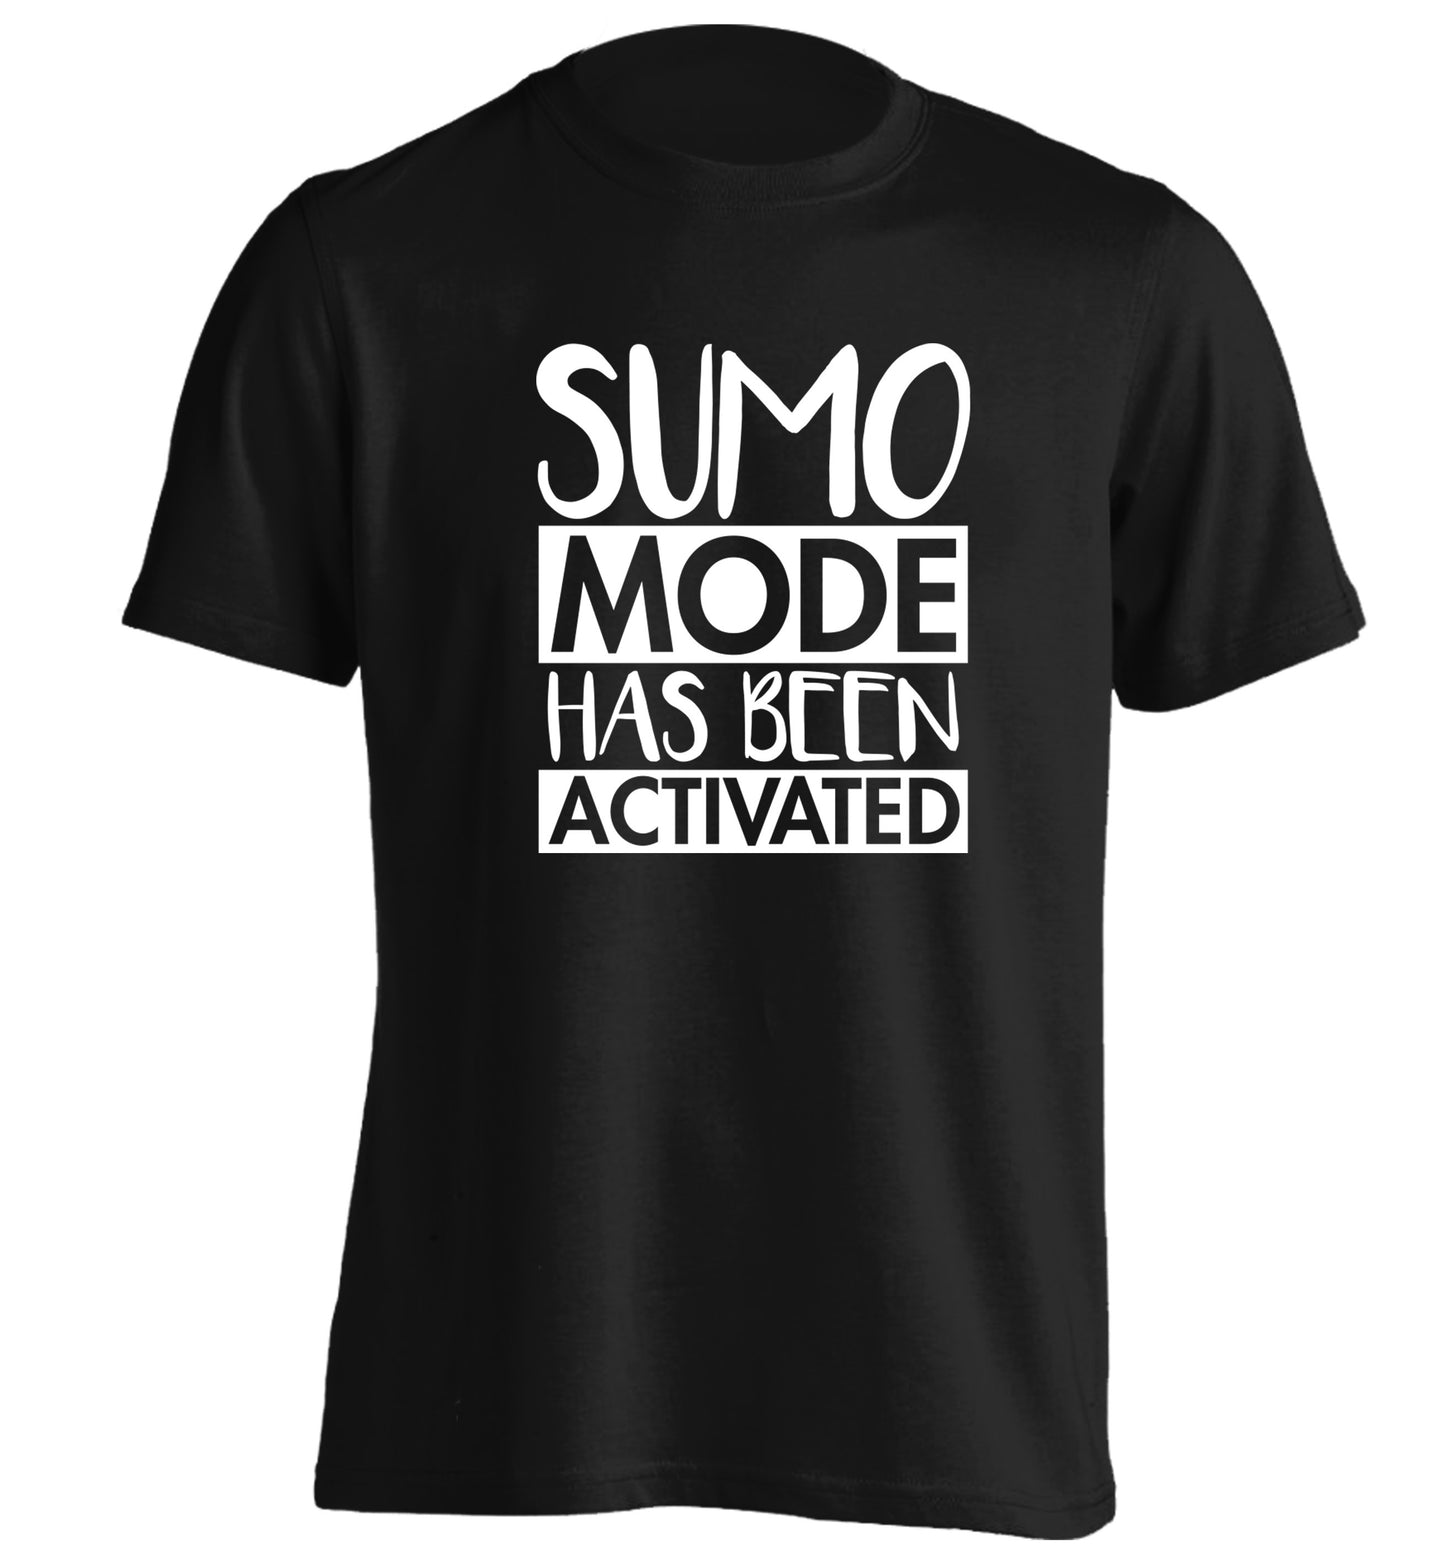 Sumo mode activated adults unisex black Tshirt 2XL